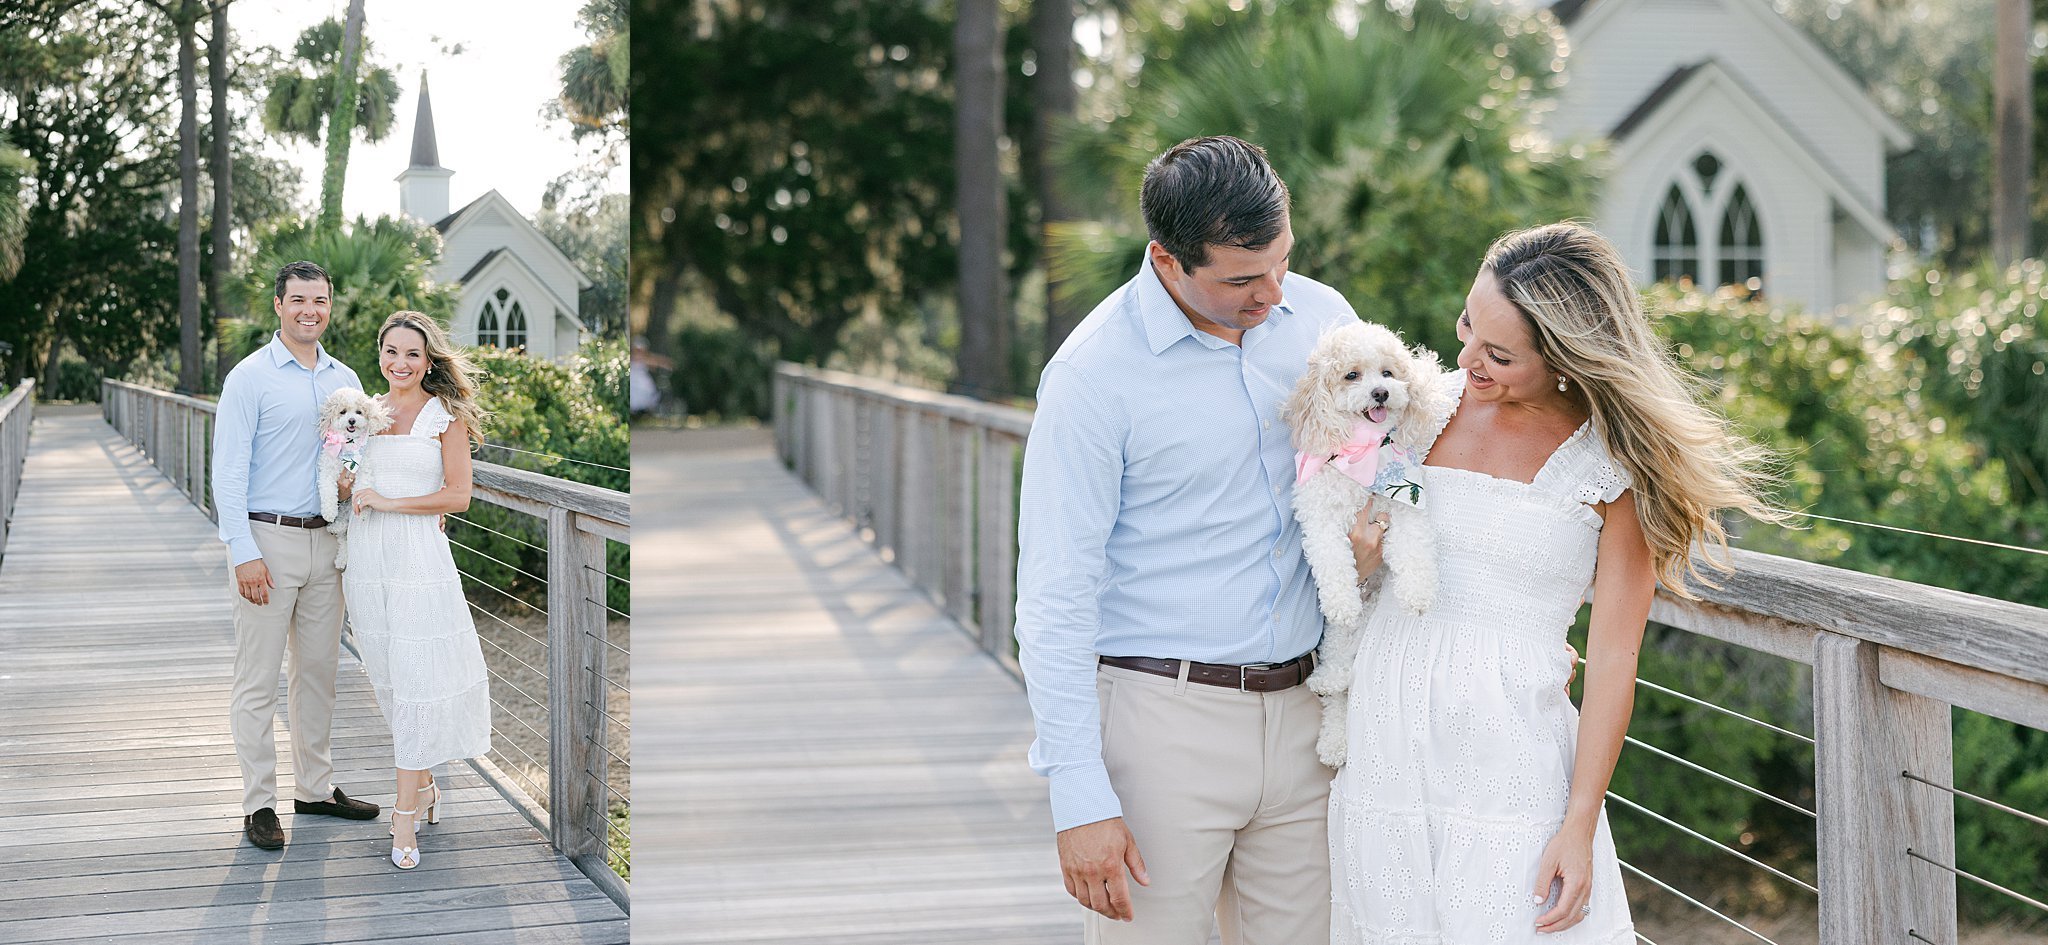 Katherine_Ives_Photography_Steen_Montage_Palmetto_Bluff_366.JPG